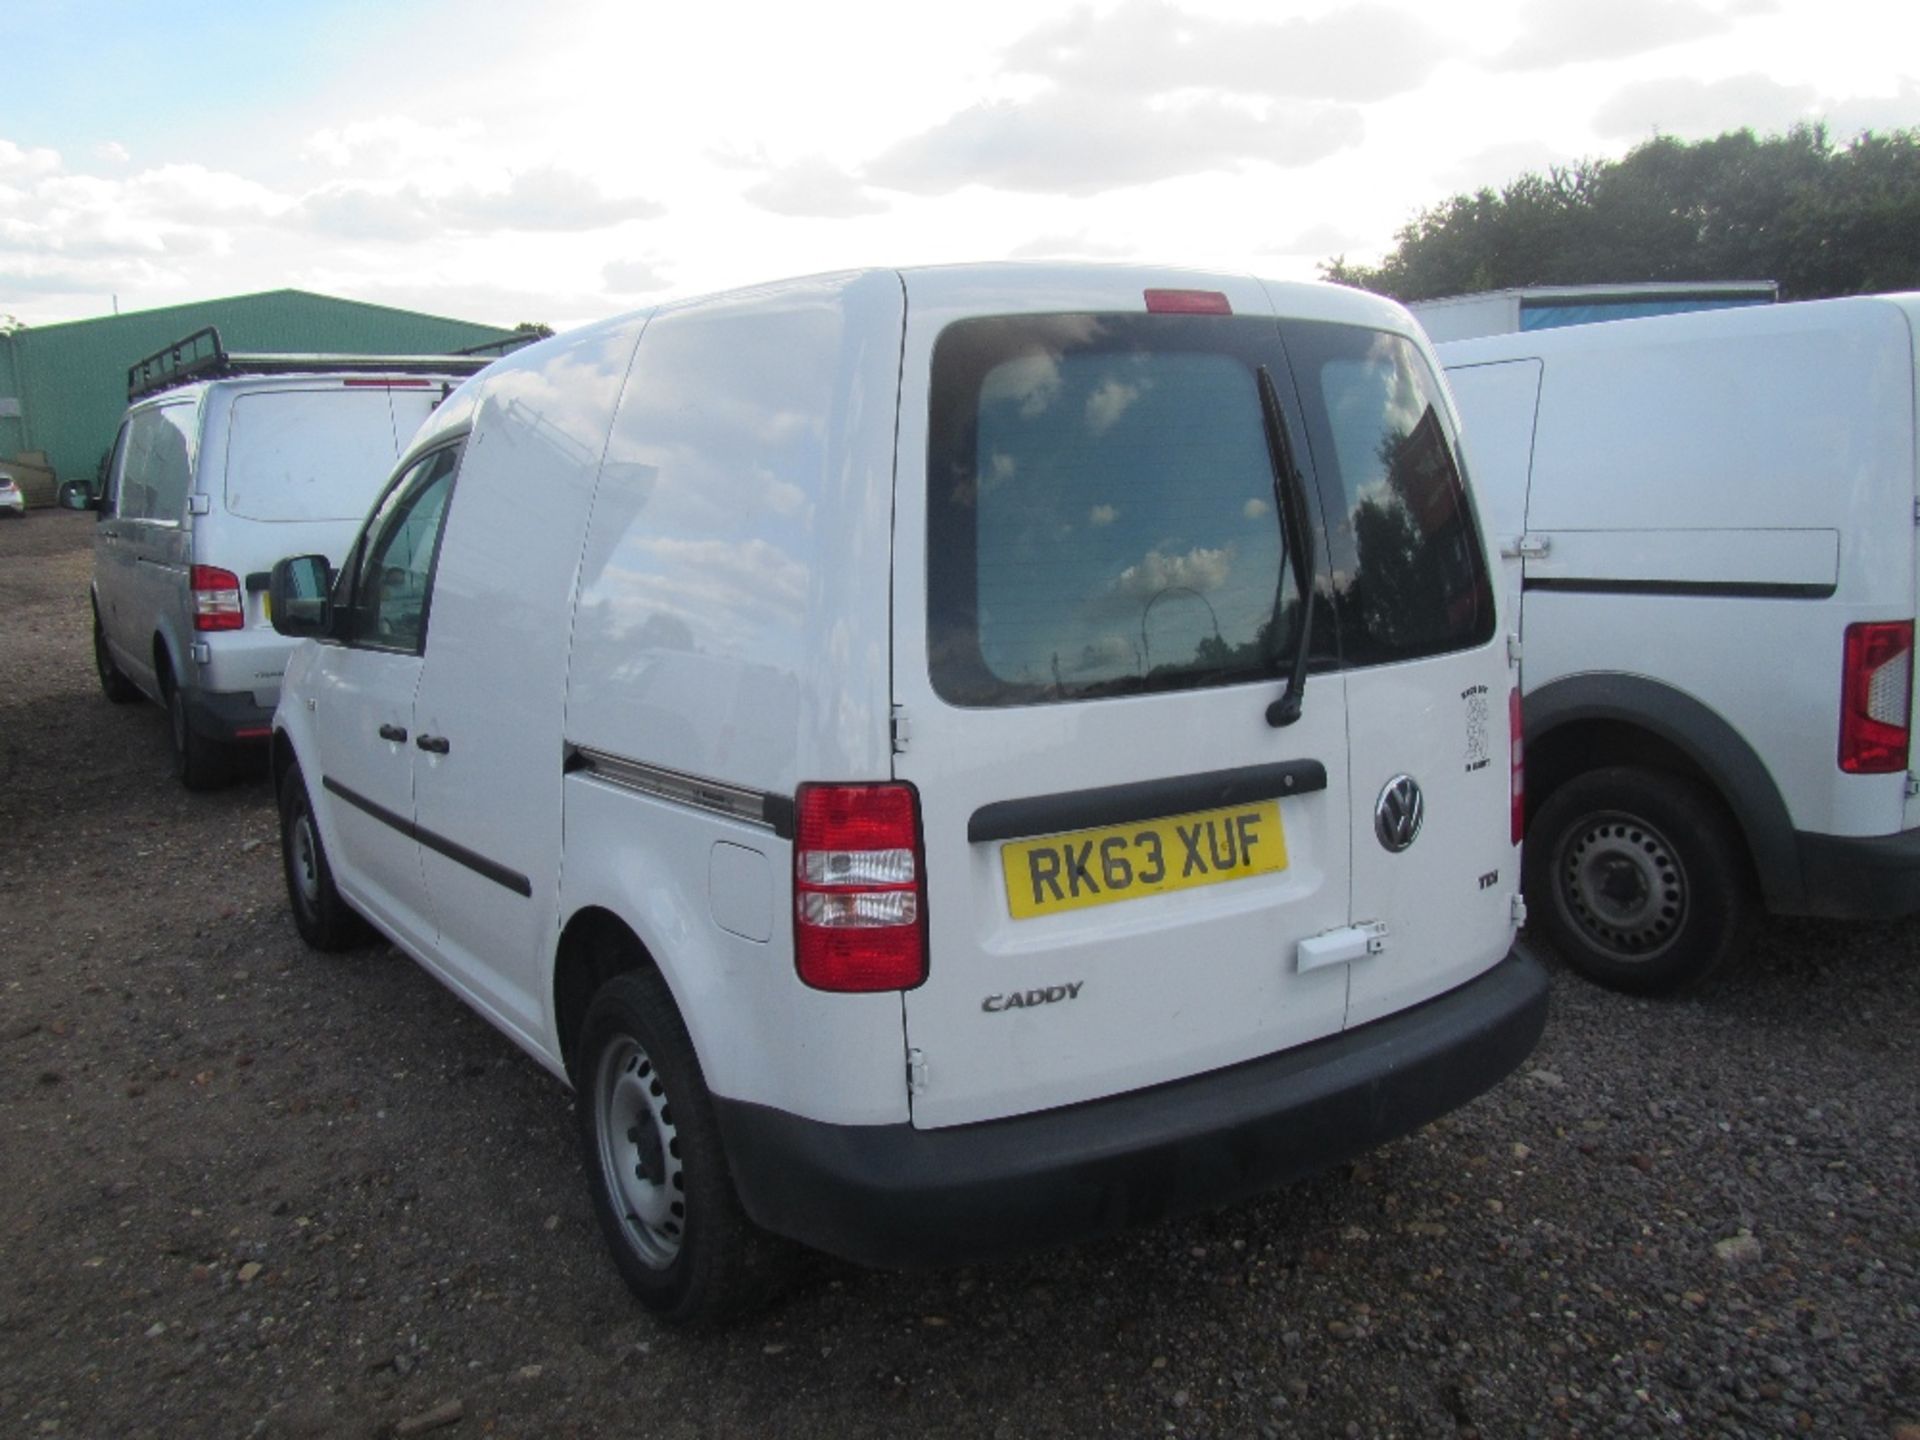 2013 VW Caddy C20 Startline TDI 5 Speed Manual Panel Van. Registration Documents will be supplied. - Image 5 of 5